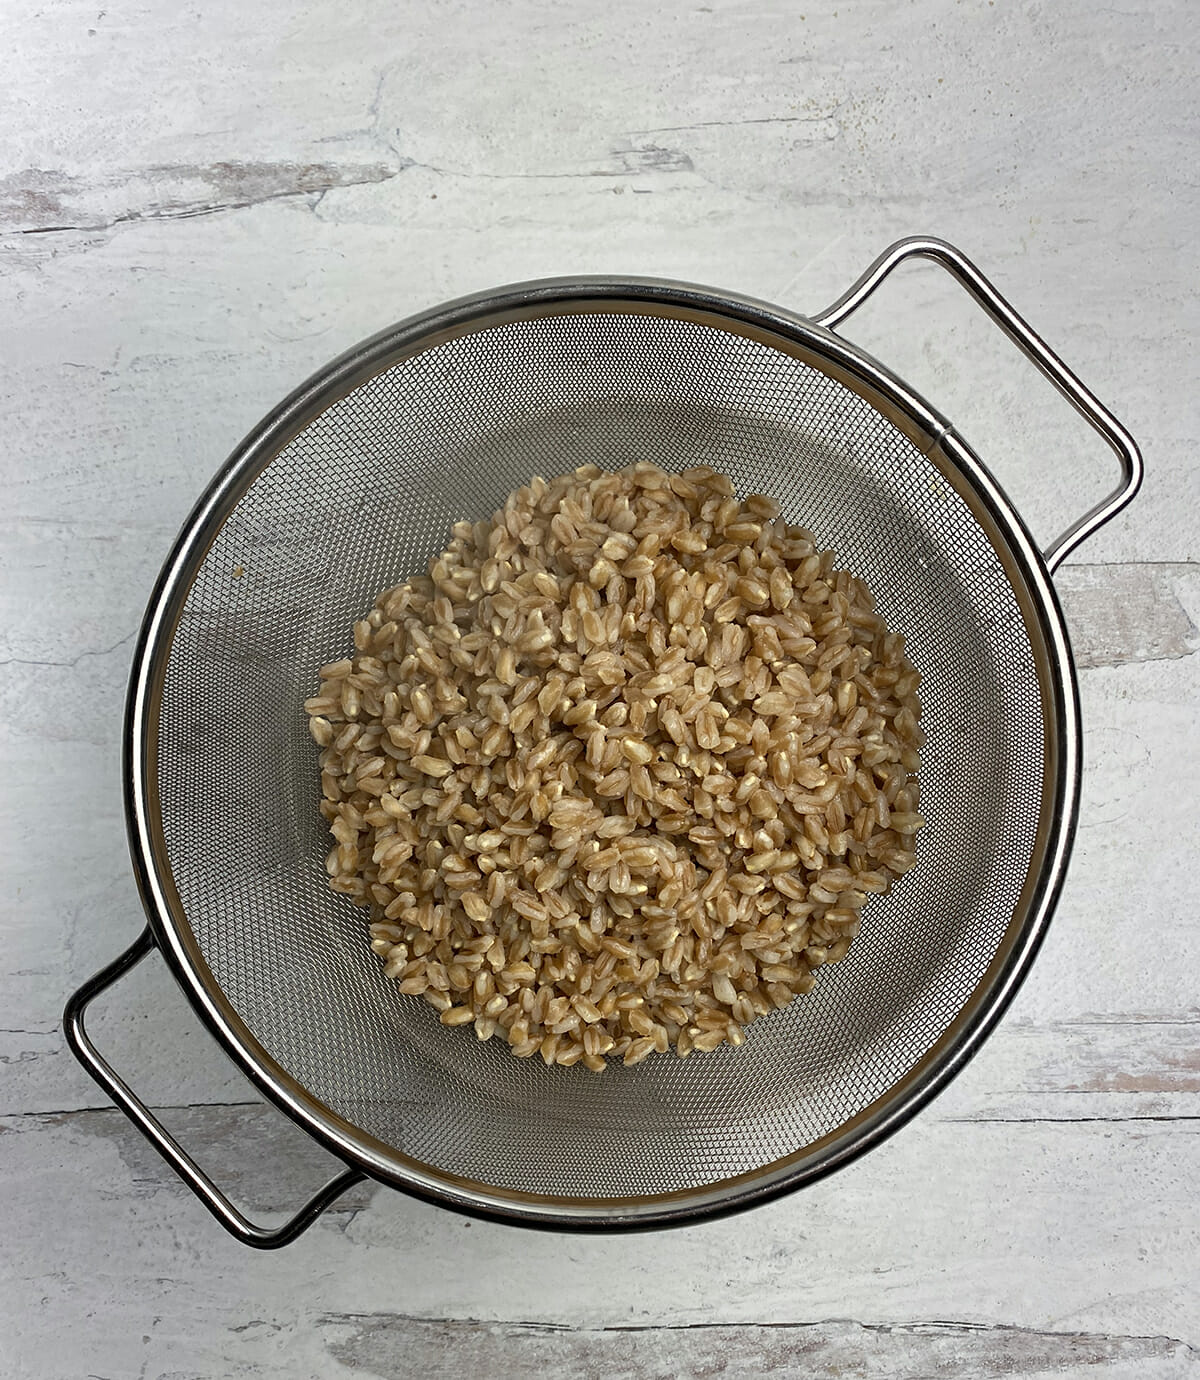 Cooked farro draining in a strainer.